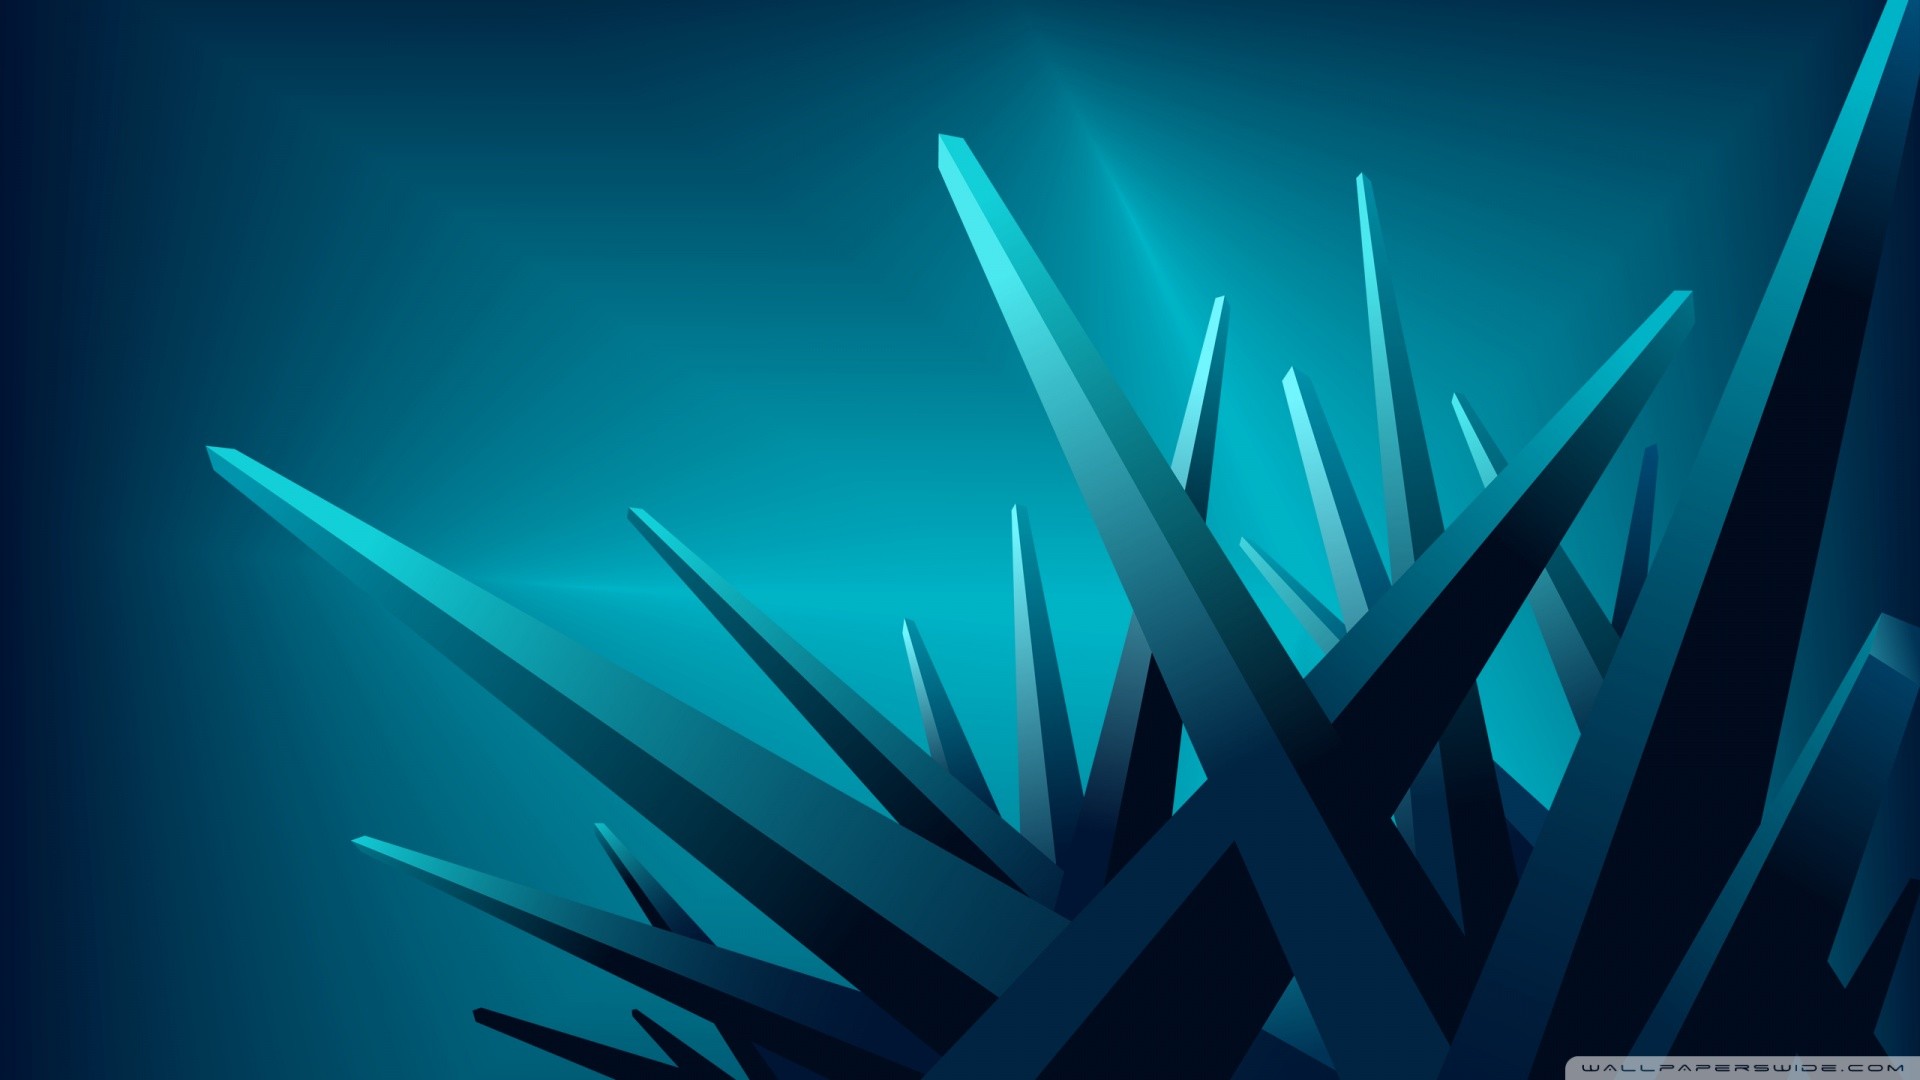 1920x1080 blue_3d_crystals-wallpaper-. more info view larger